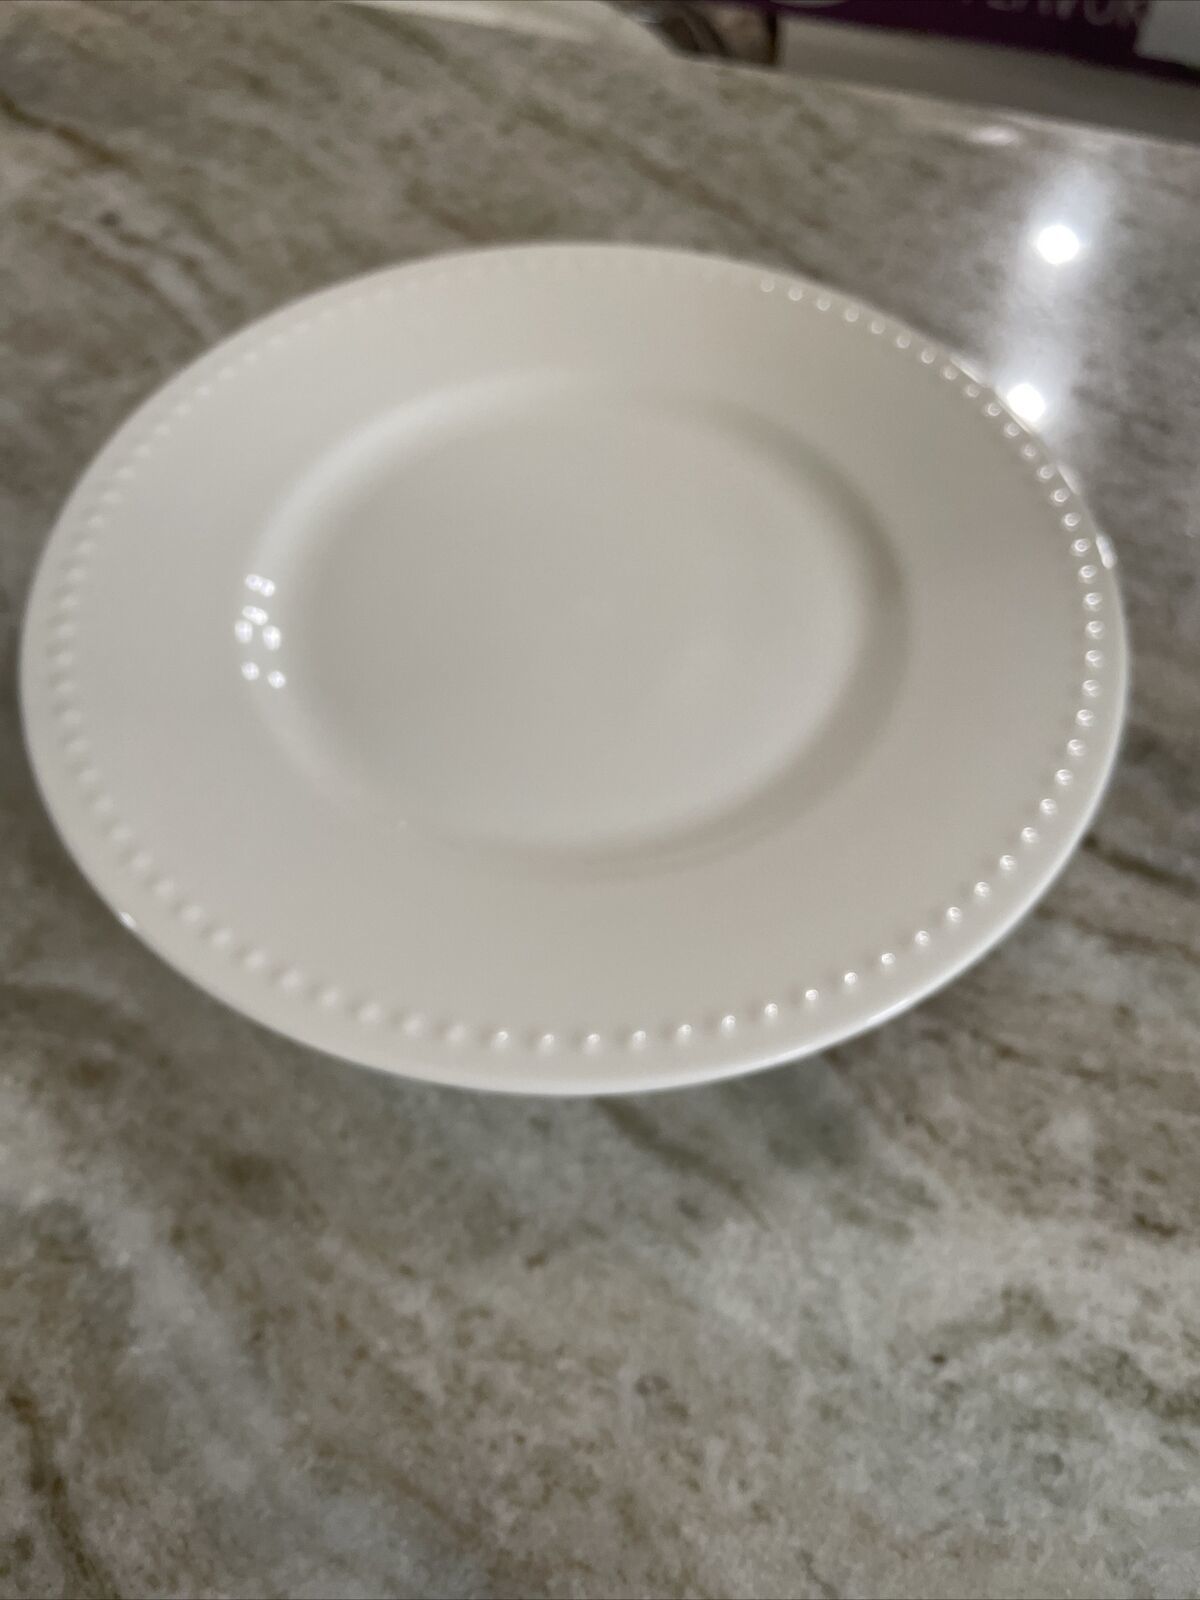 Primary image for Our Table Bone china salad plate